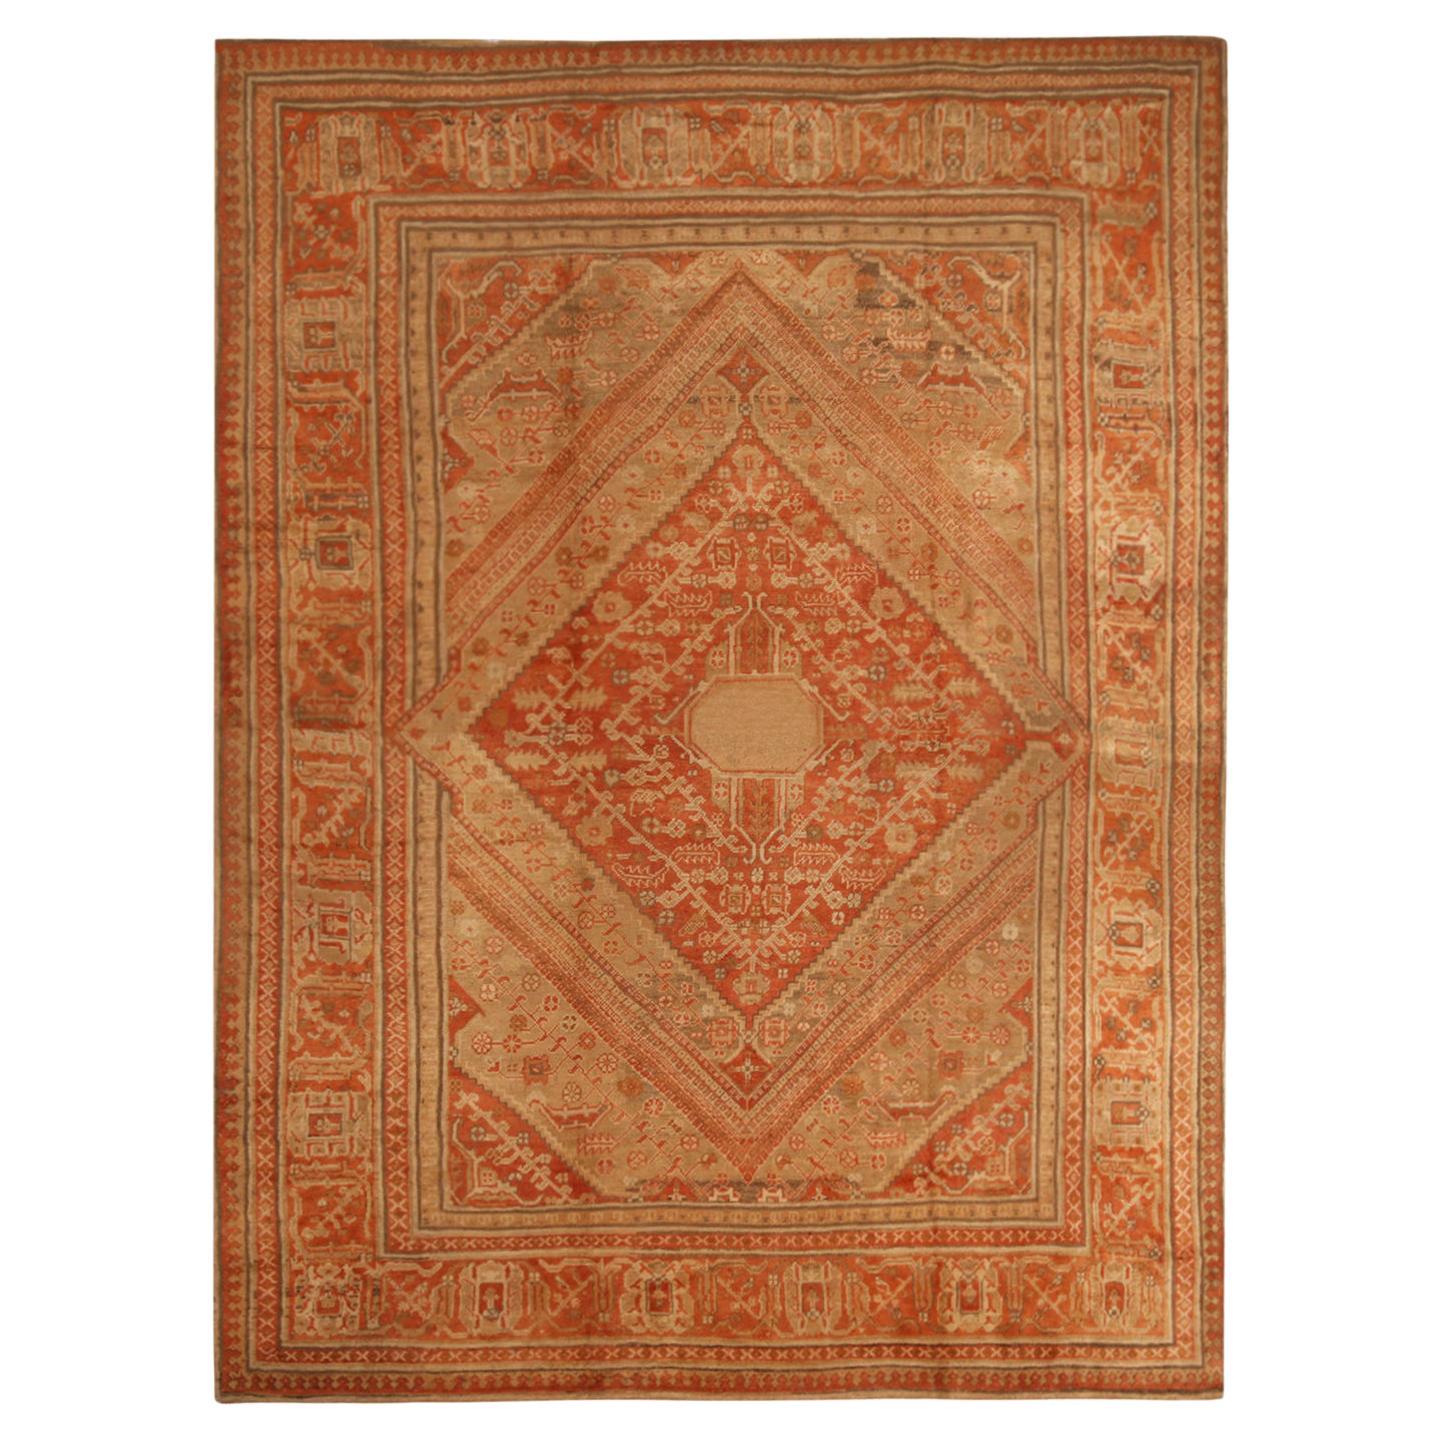 Antique Oushak Beige and Red Wool Rug with Medallion Field Design by Rug & Kilim